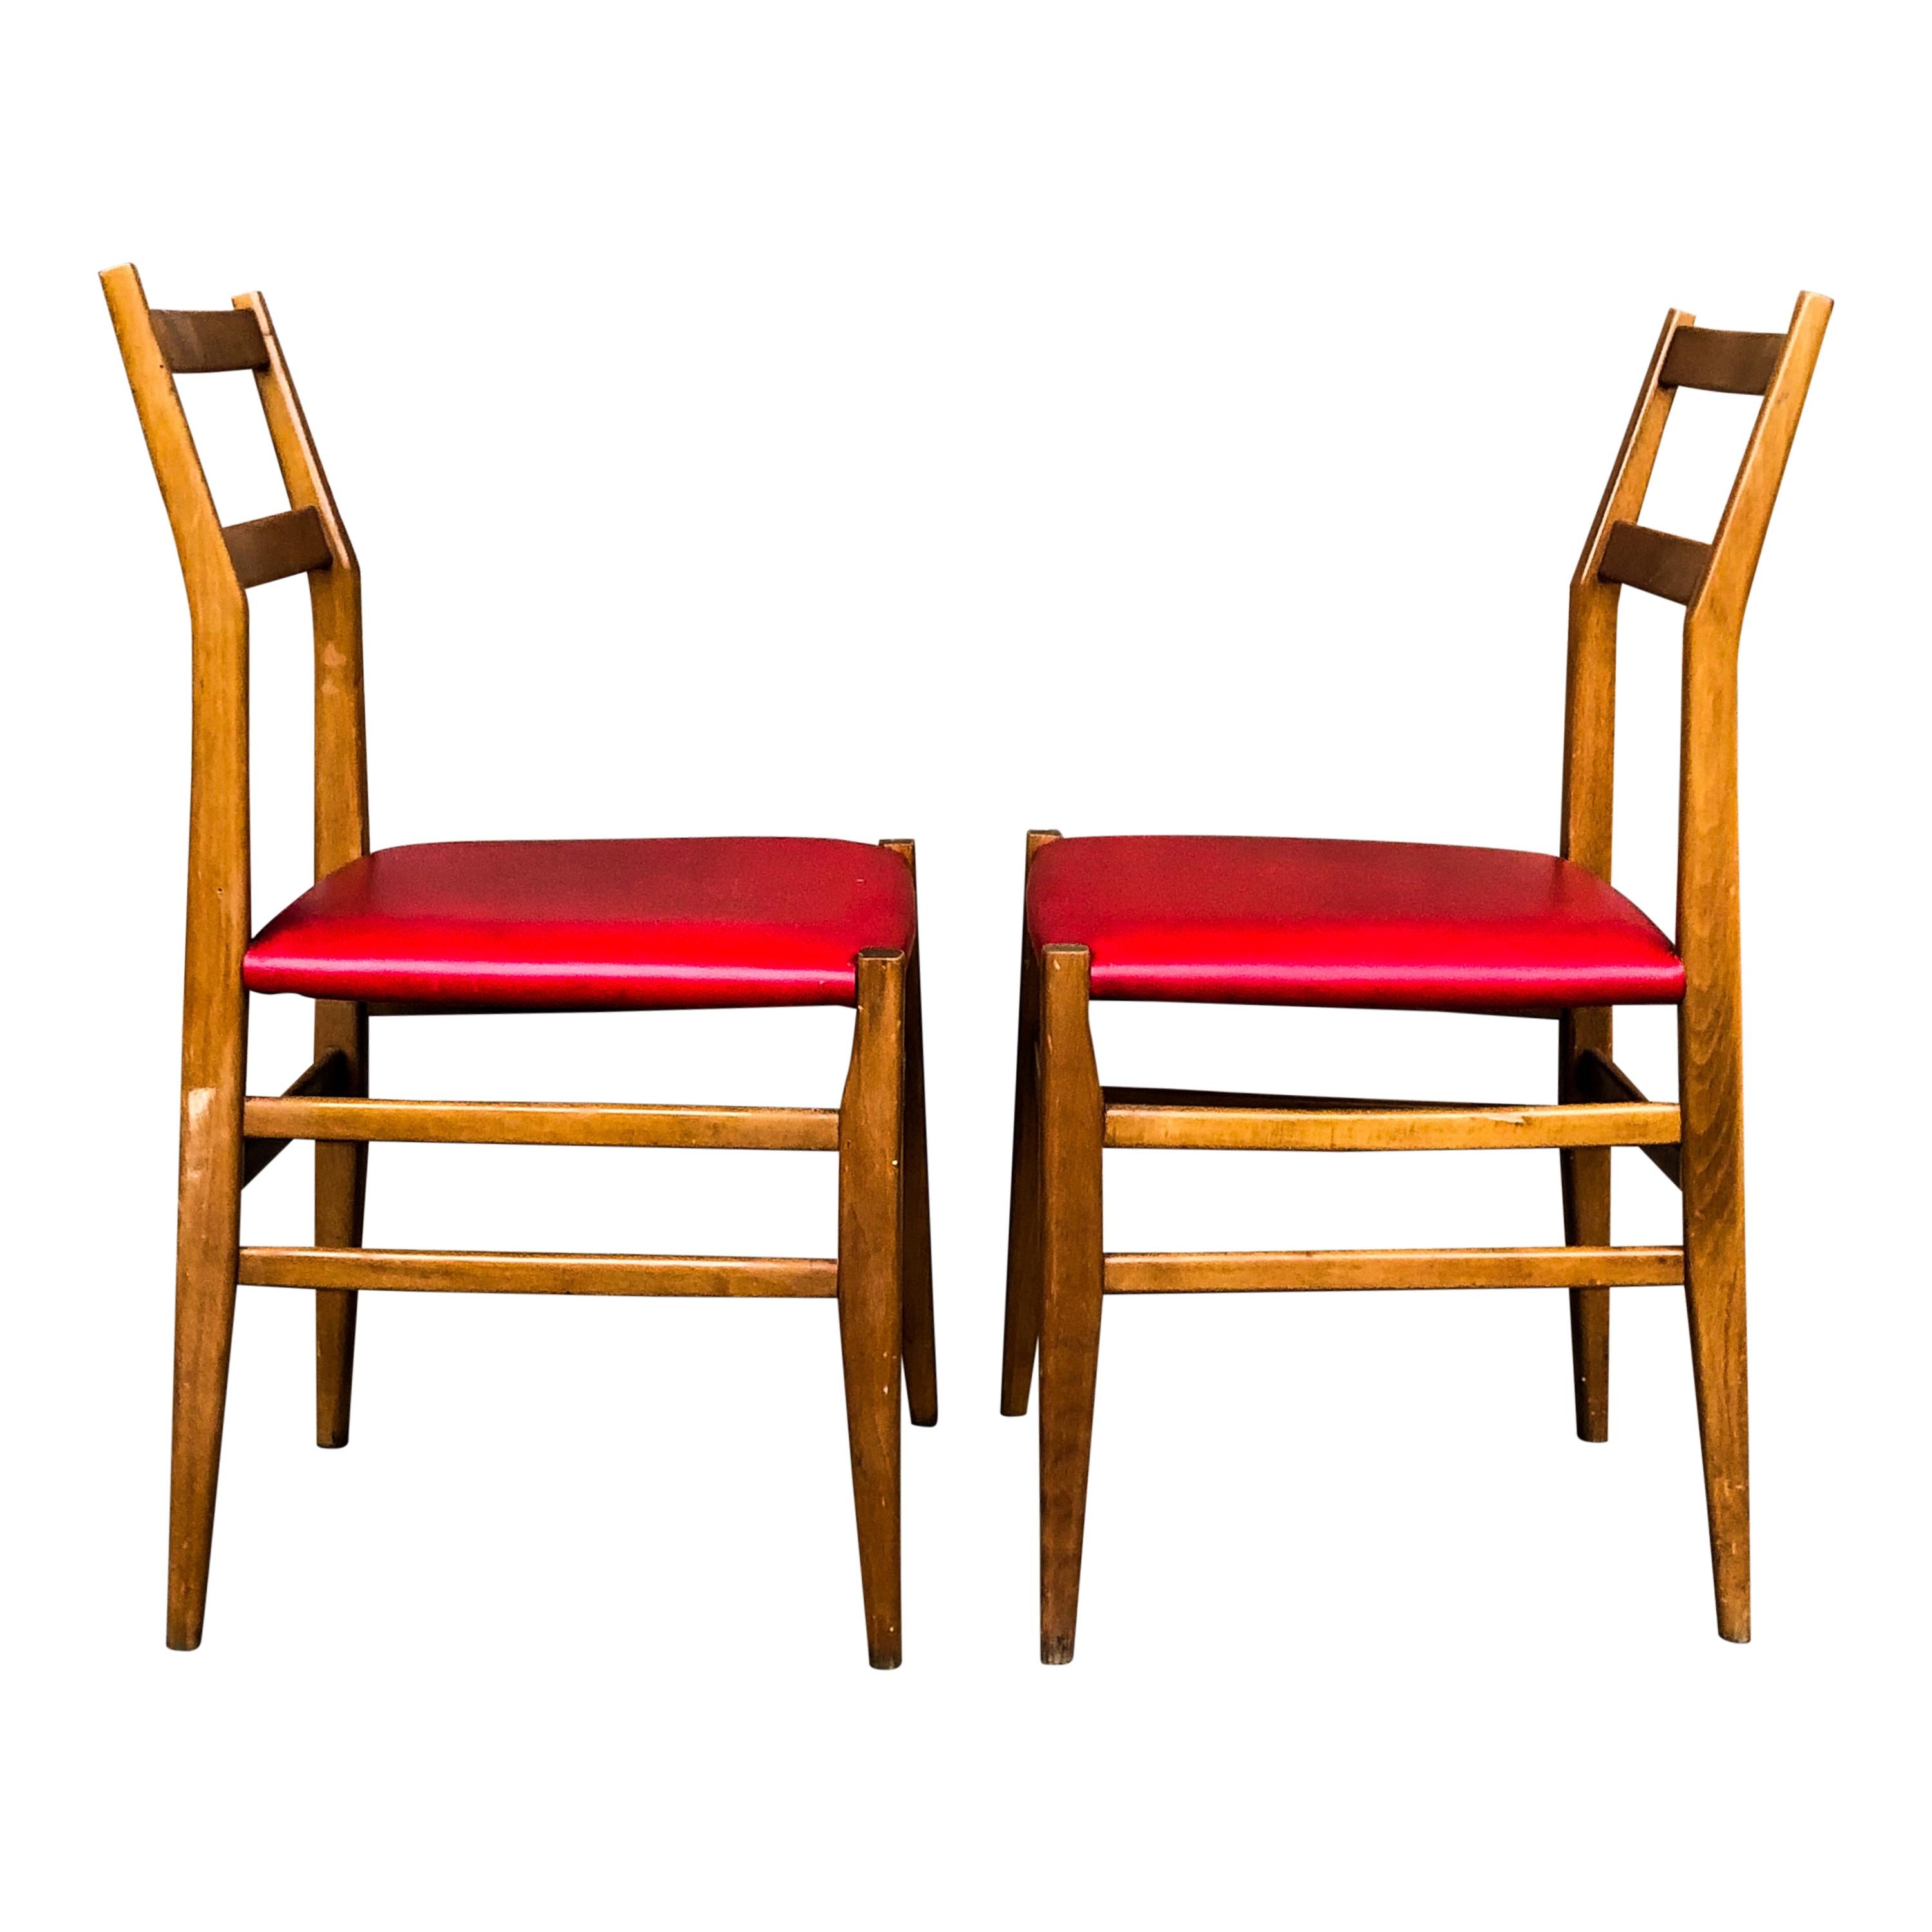 Red Faux Leather Leggera Dining Chairs by Gio Ponti for Cassina, 1960s, Set of 6 For Sale 4